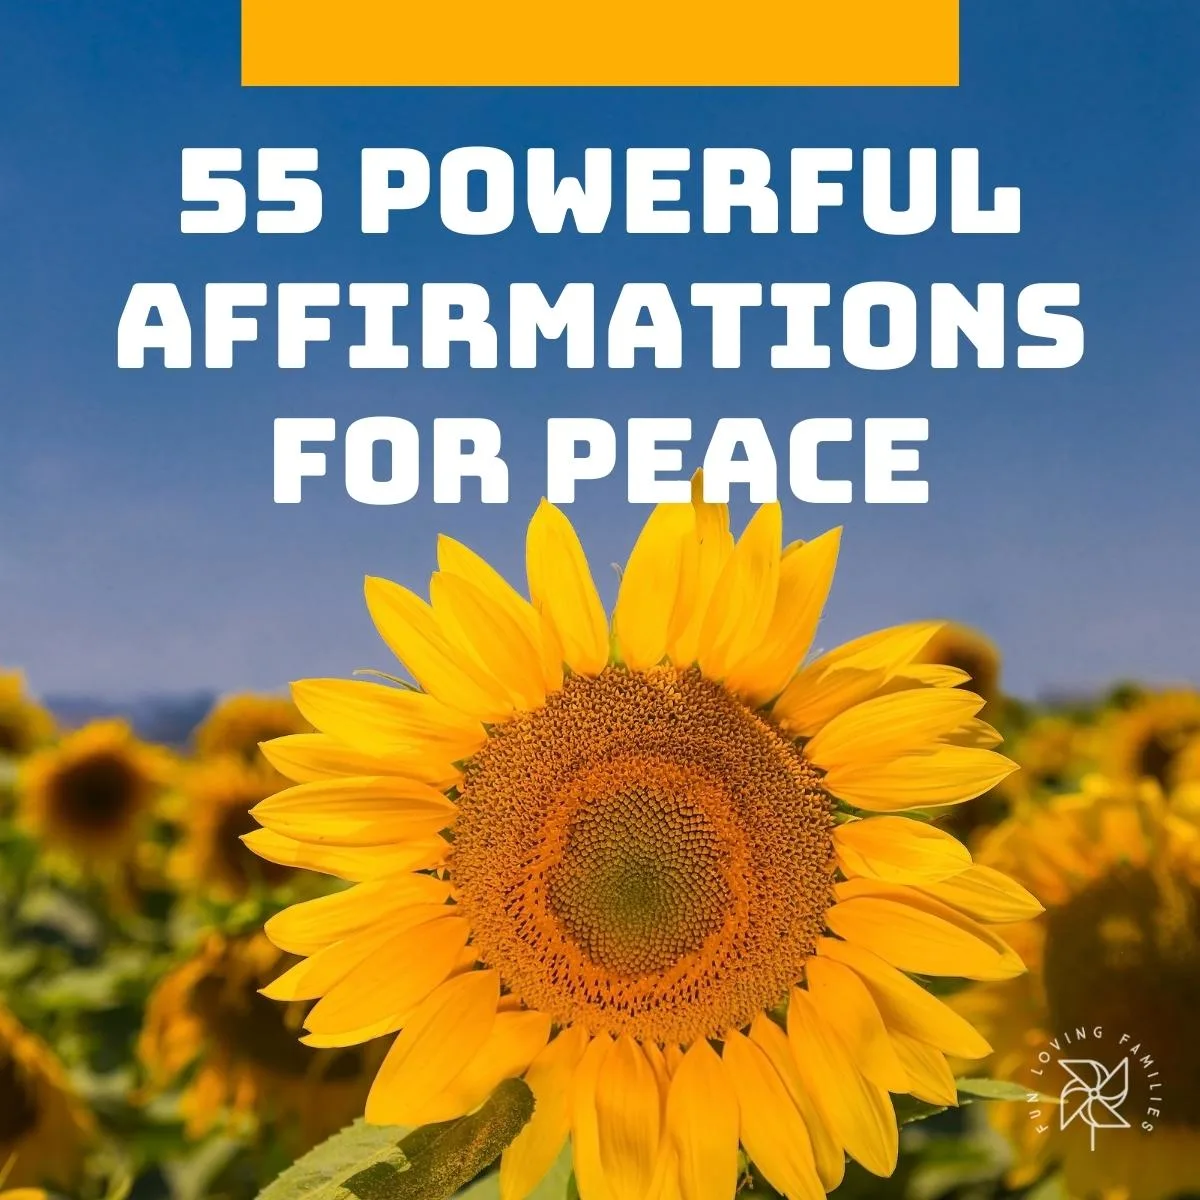 55 Powerful Affirmations for Peace